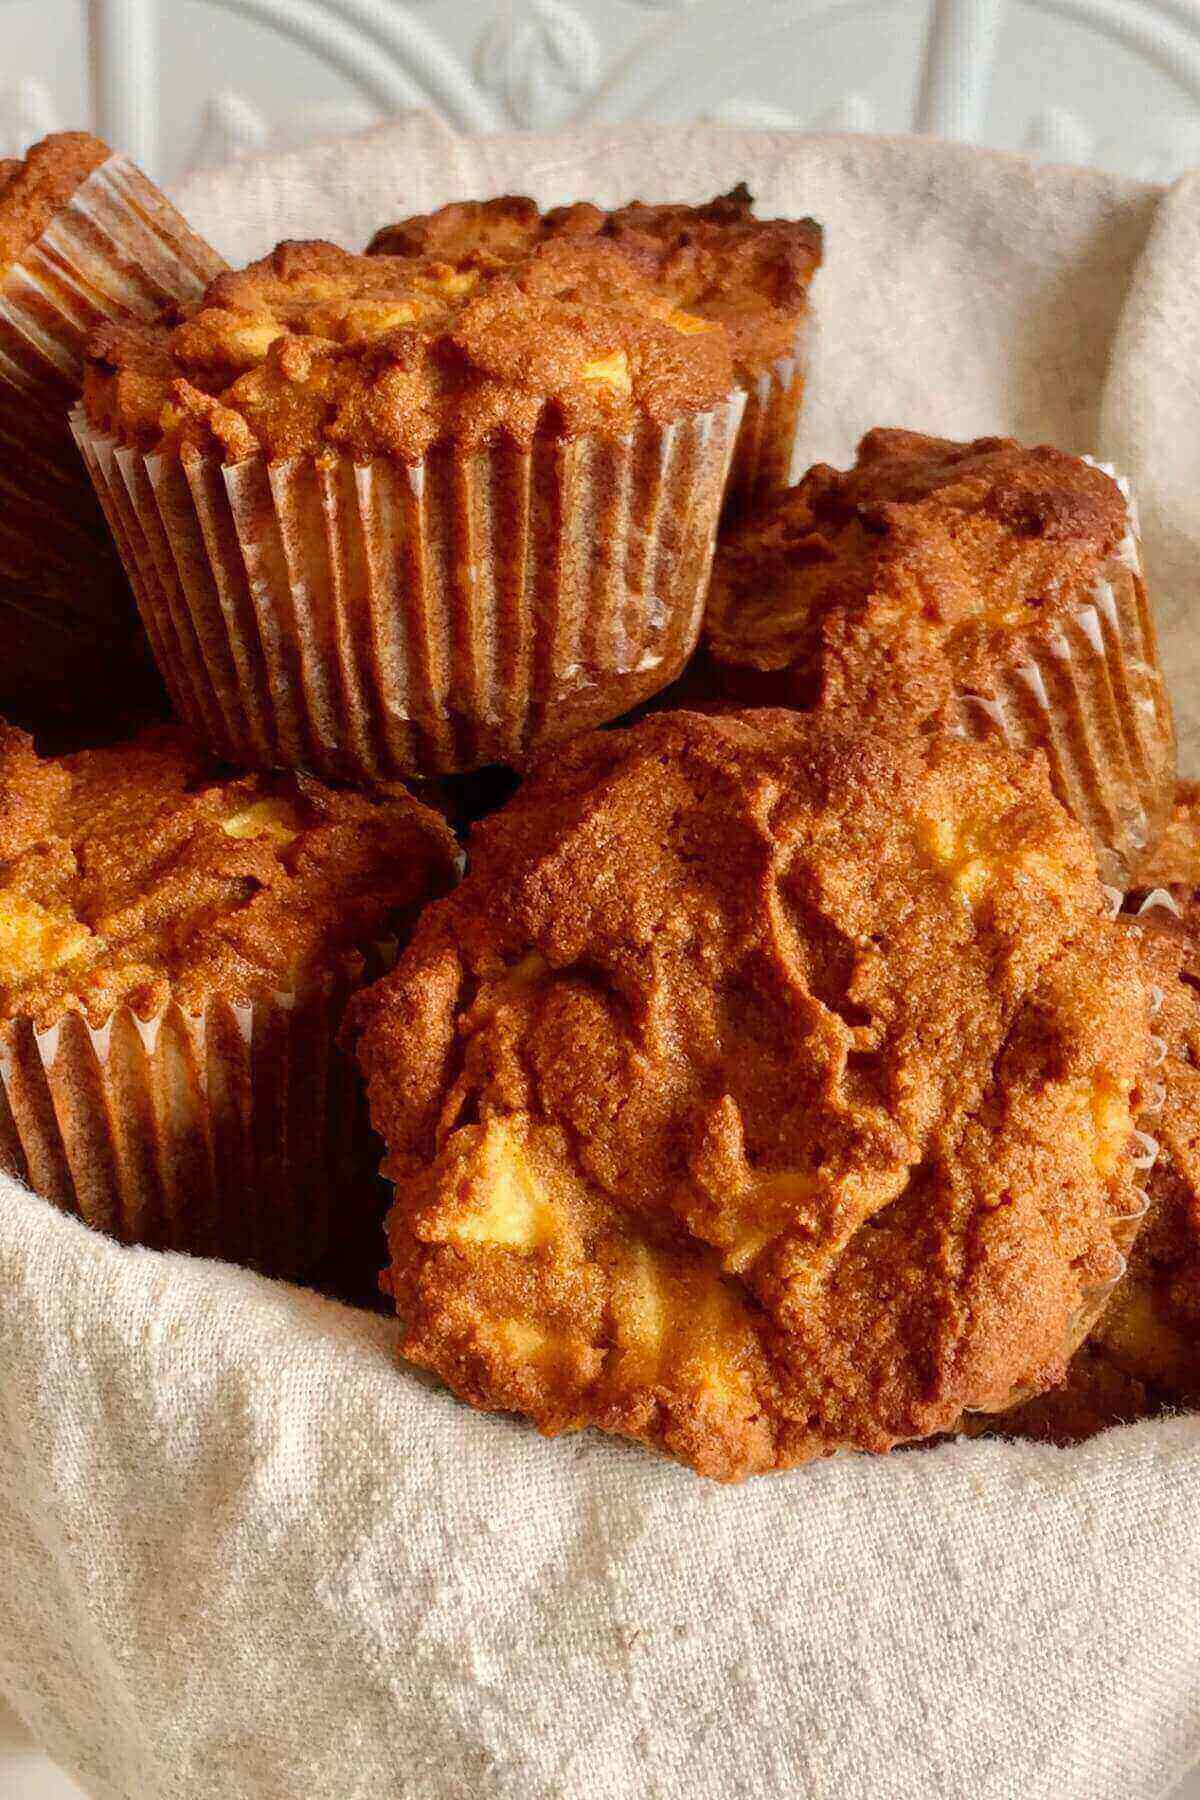 Apple muffins in a basket lined with a linen napkin.